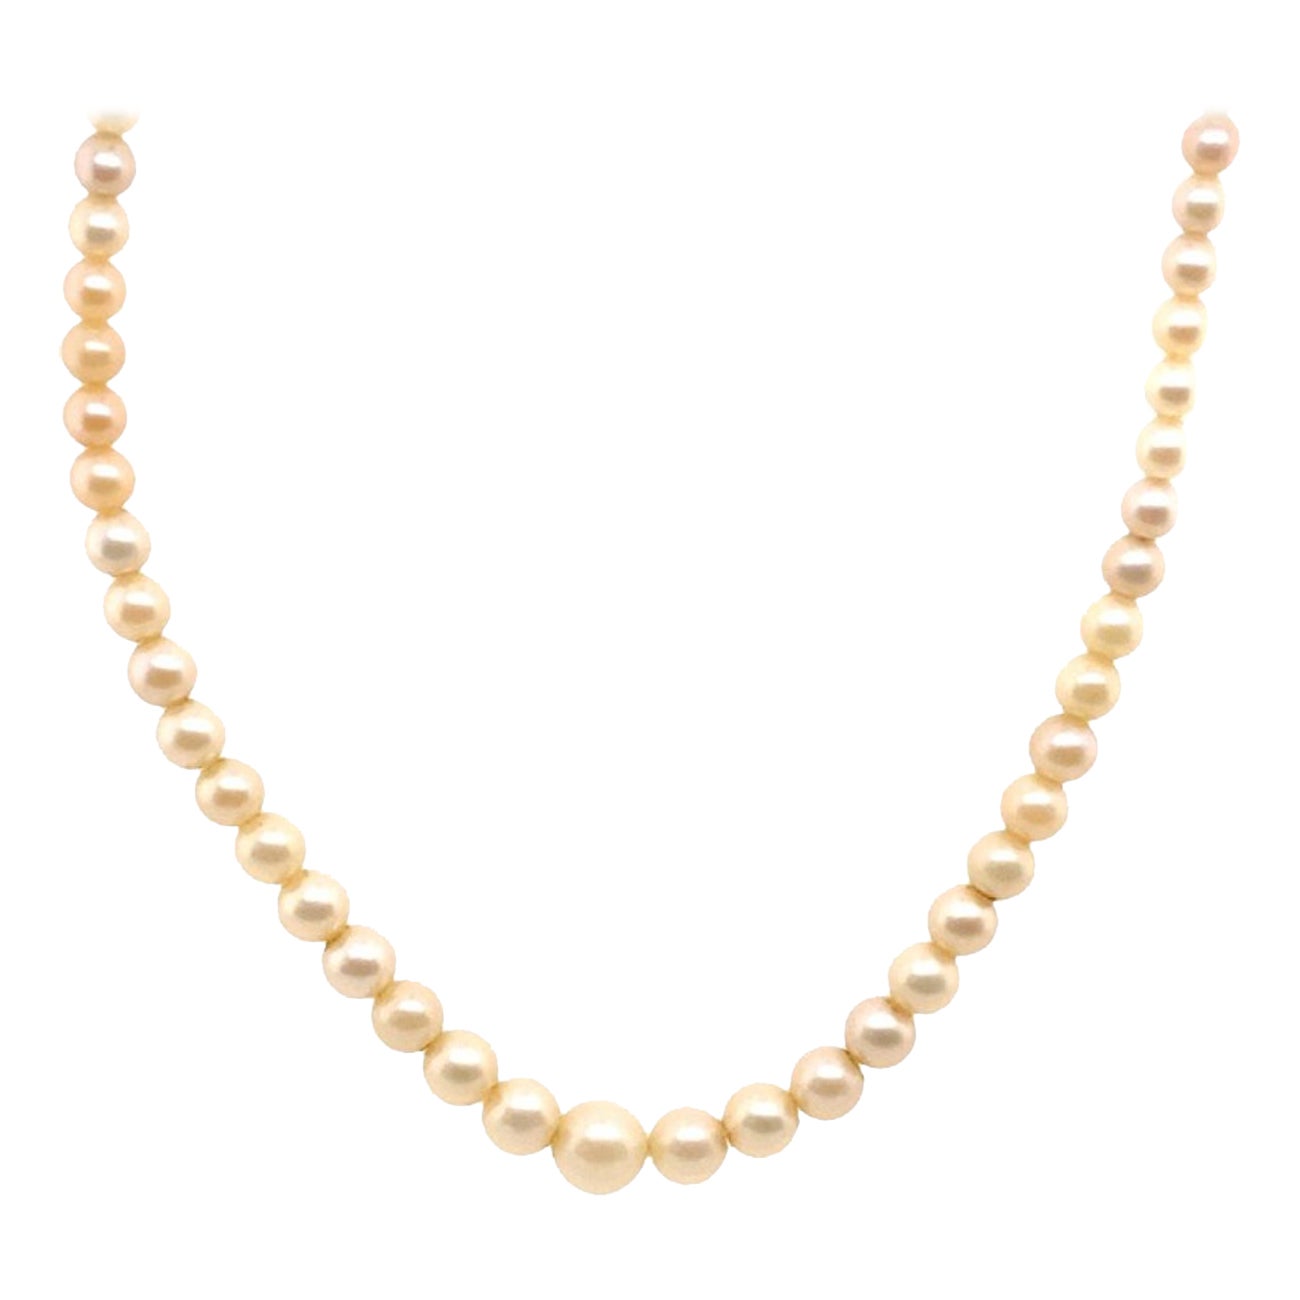 Graduated Cultured Pearl Necklace with Silver Clasp & Safety Chain